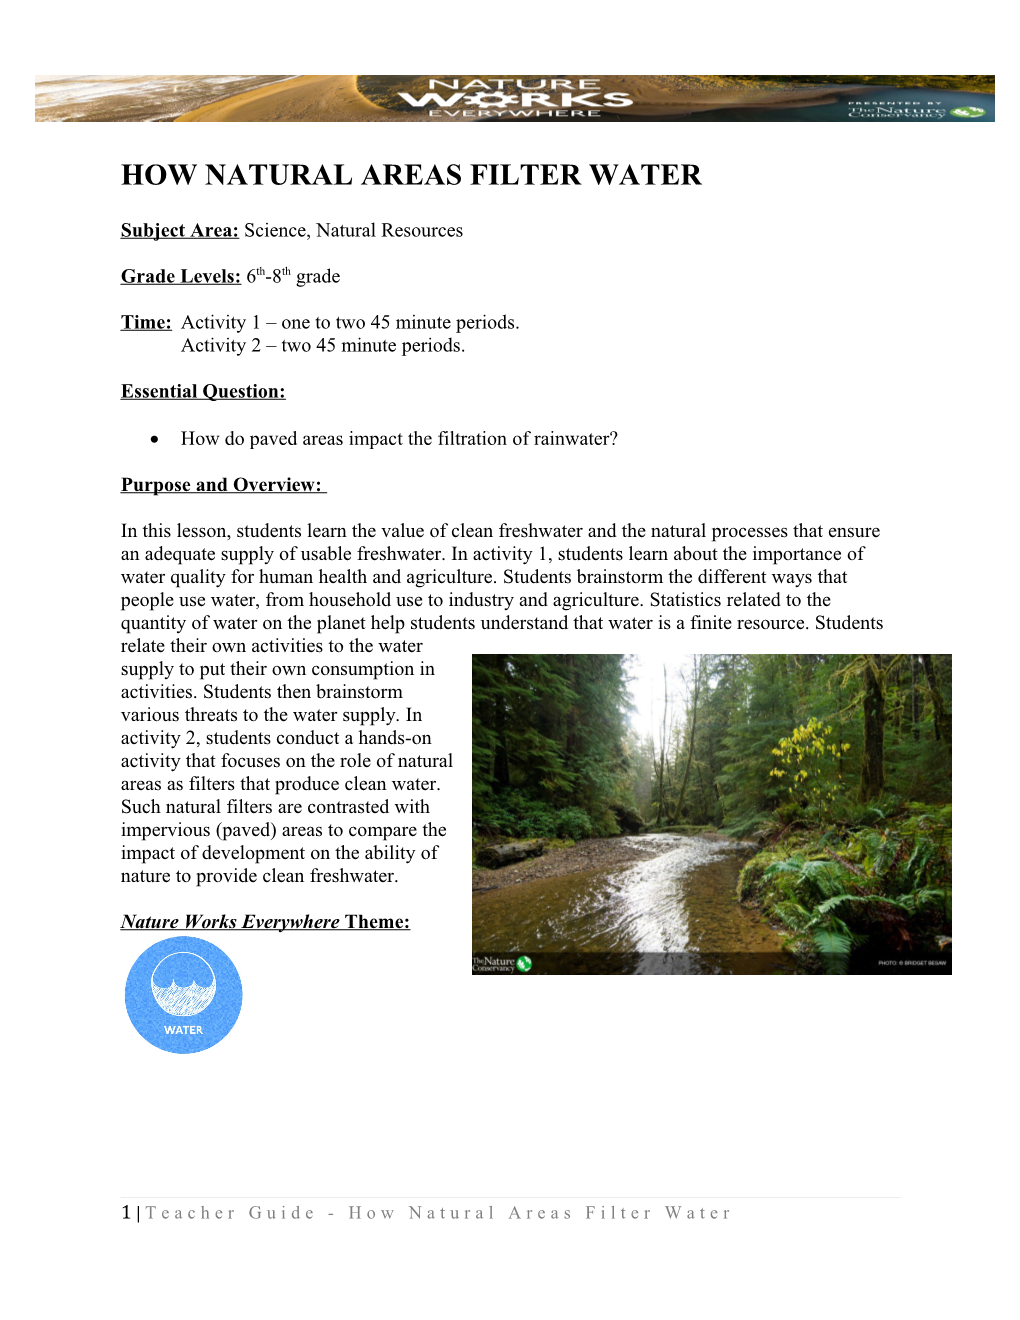 How Natural Areas Filter Water